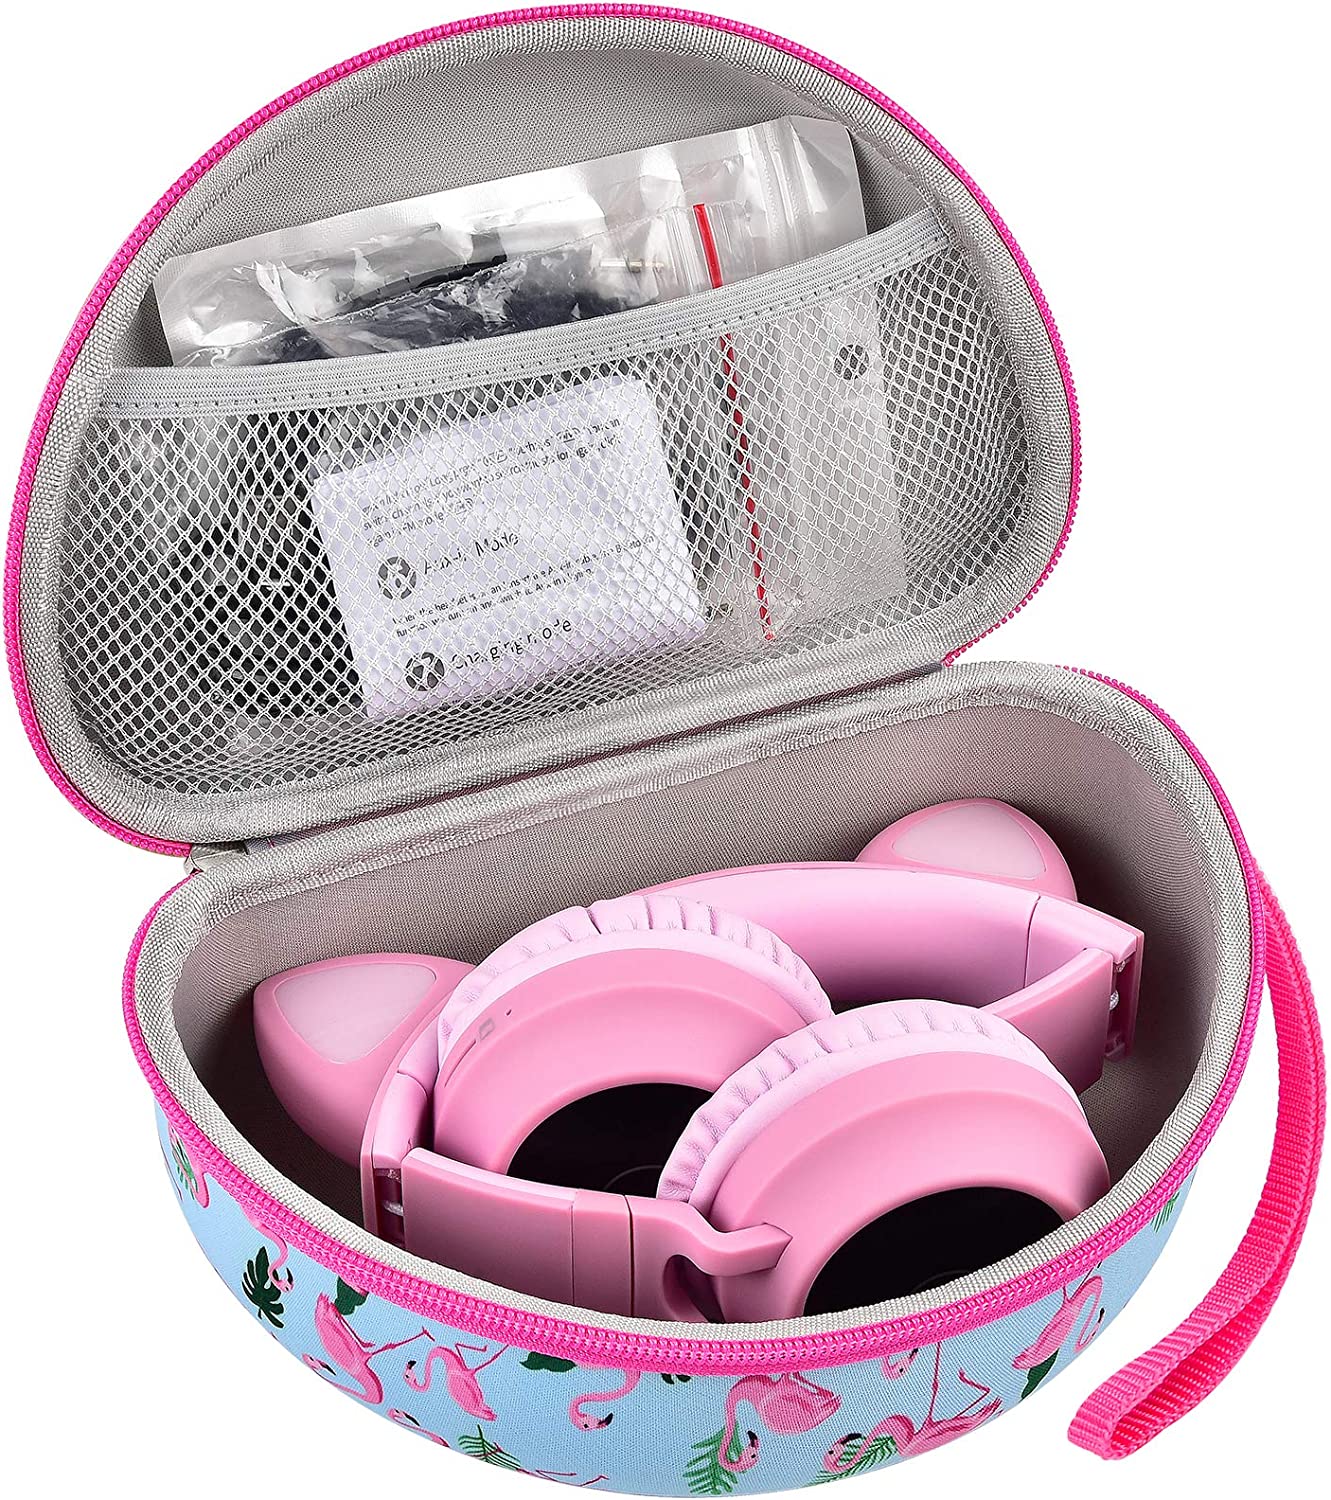 Headphone Case Comatible for Riwbox CT-7 Pink& Green 3.5mm Jack CT-7S Cat iClever IC-HS01 Mpow BH297B Wired and Picun Bluetooth Wireless Over-Ear Headphones Headset for Kids